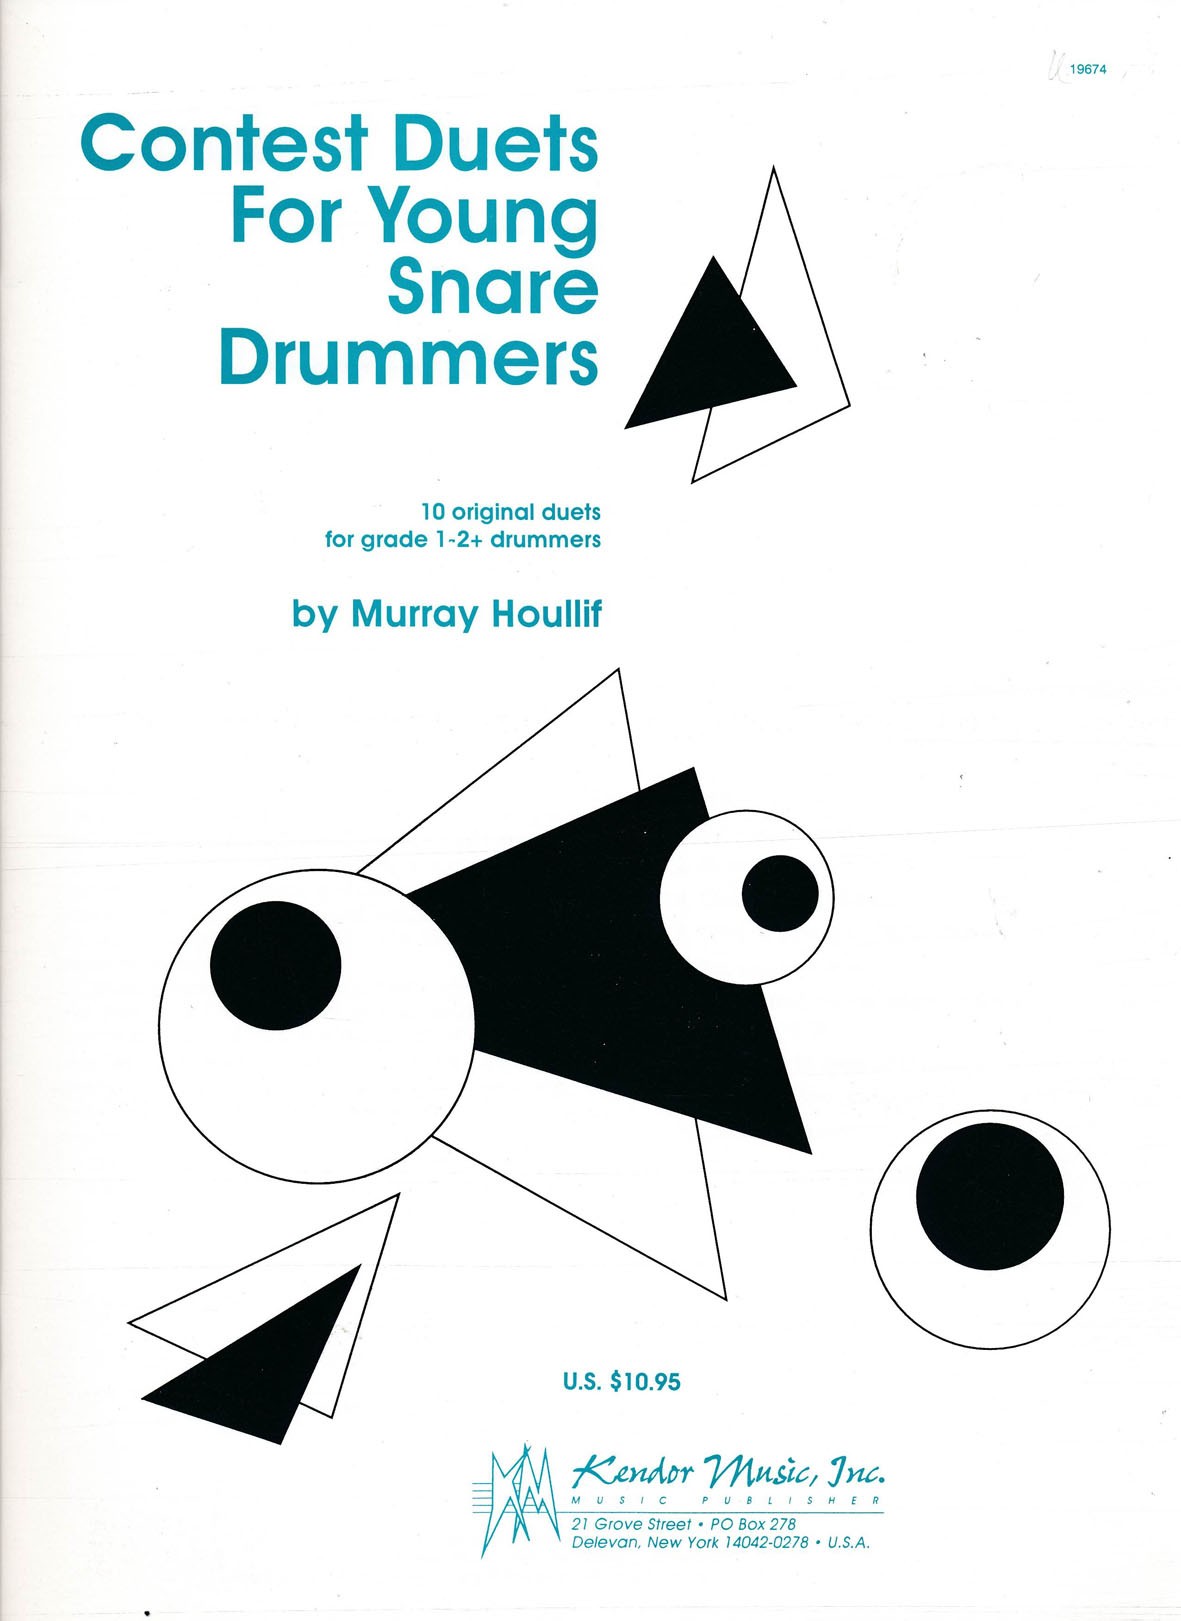 Contest Duets For Young Snare Drummers by Murray Houllif